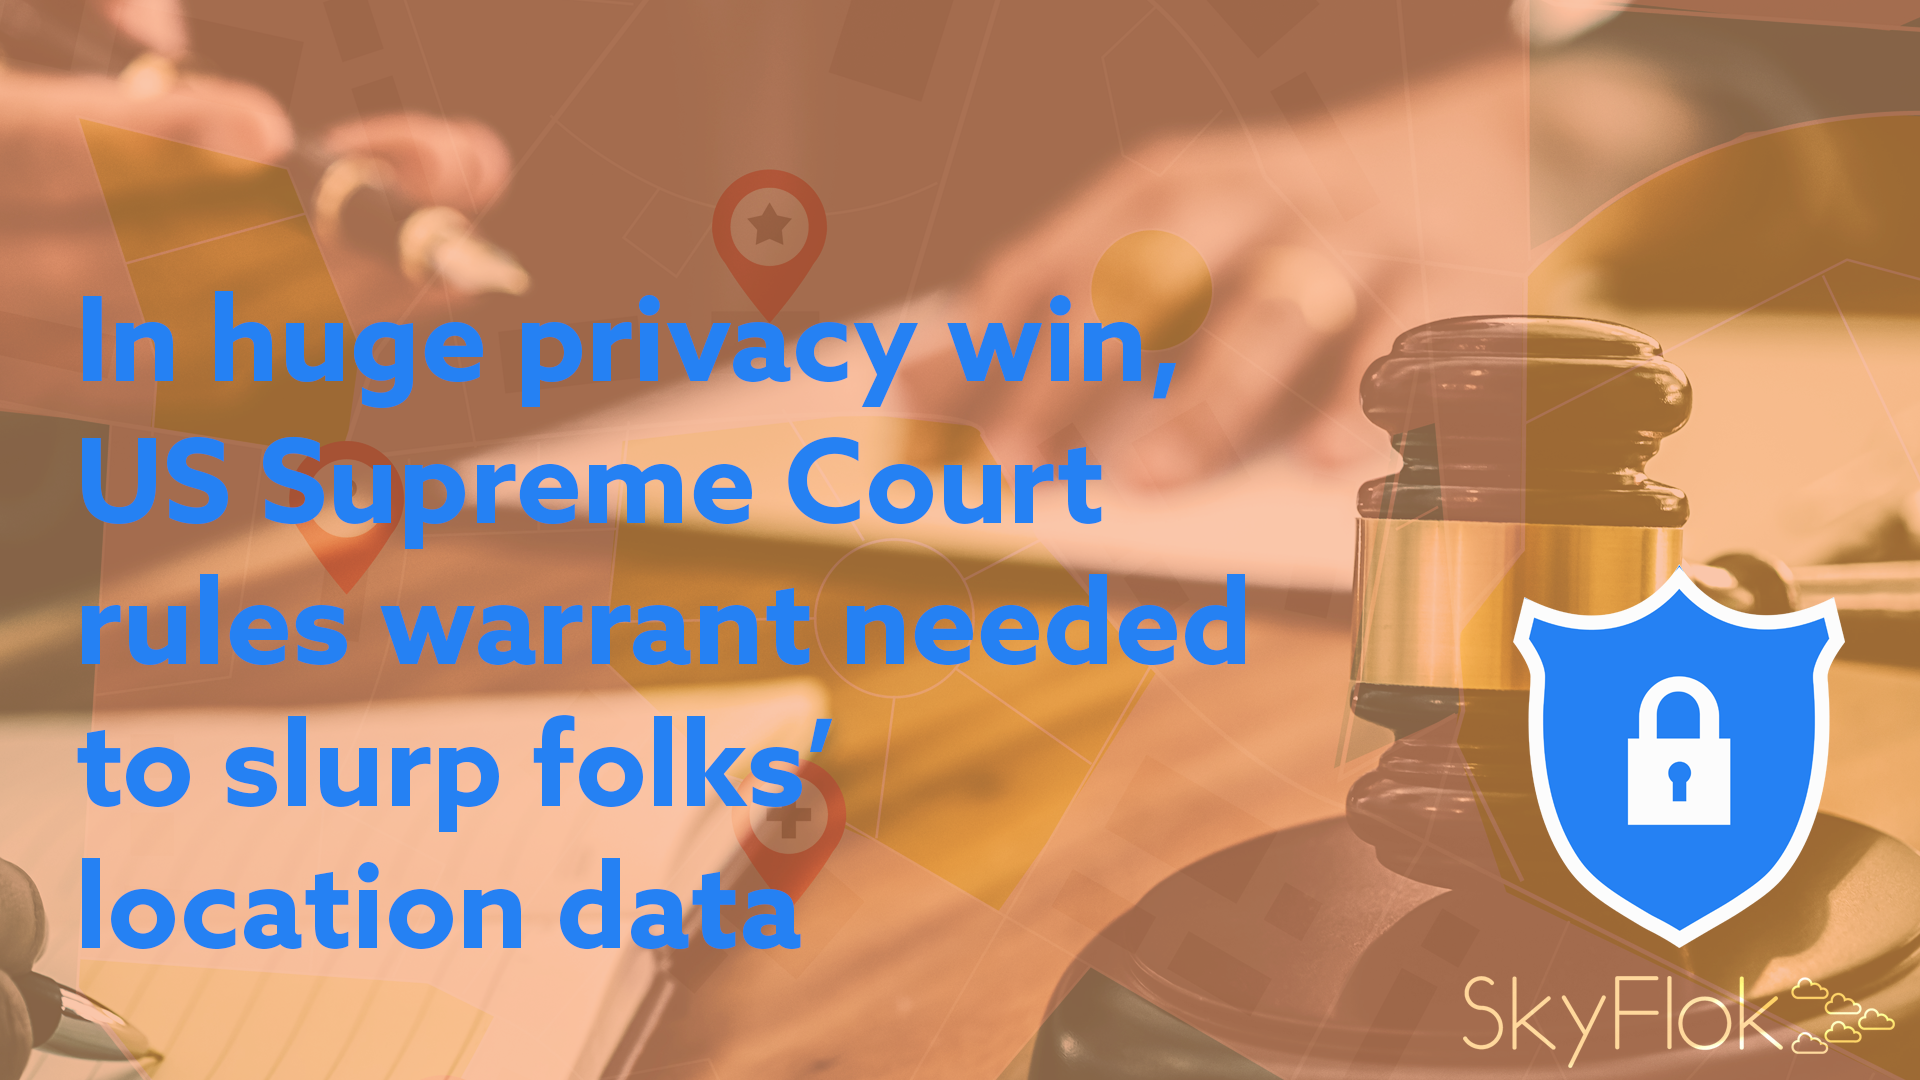 In huge privacy win, US Supreme Court rules warrant needed to slurp folks’ location data